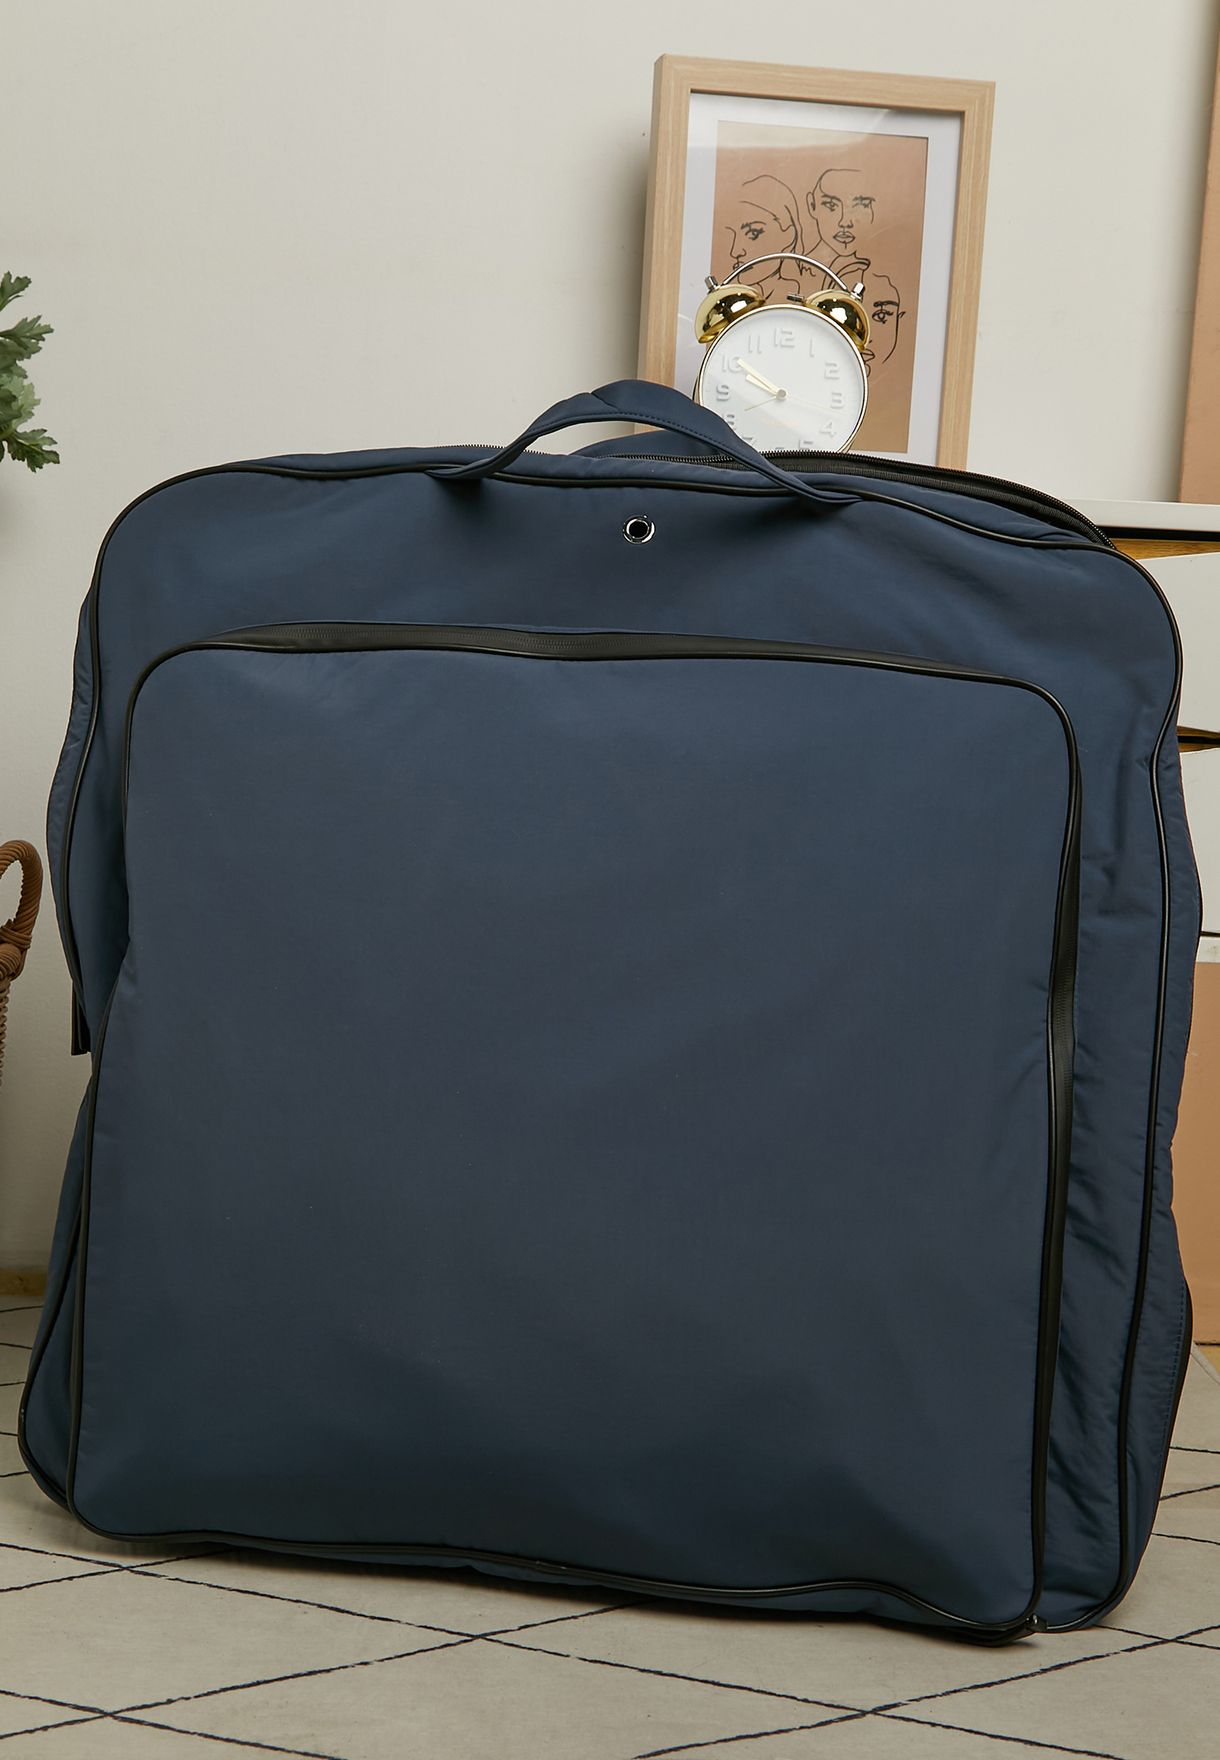 Cittie Suit Travel Bag And Document Holder